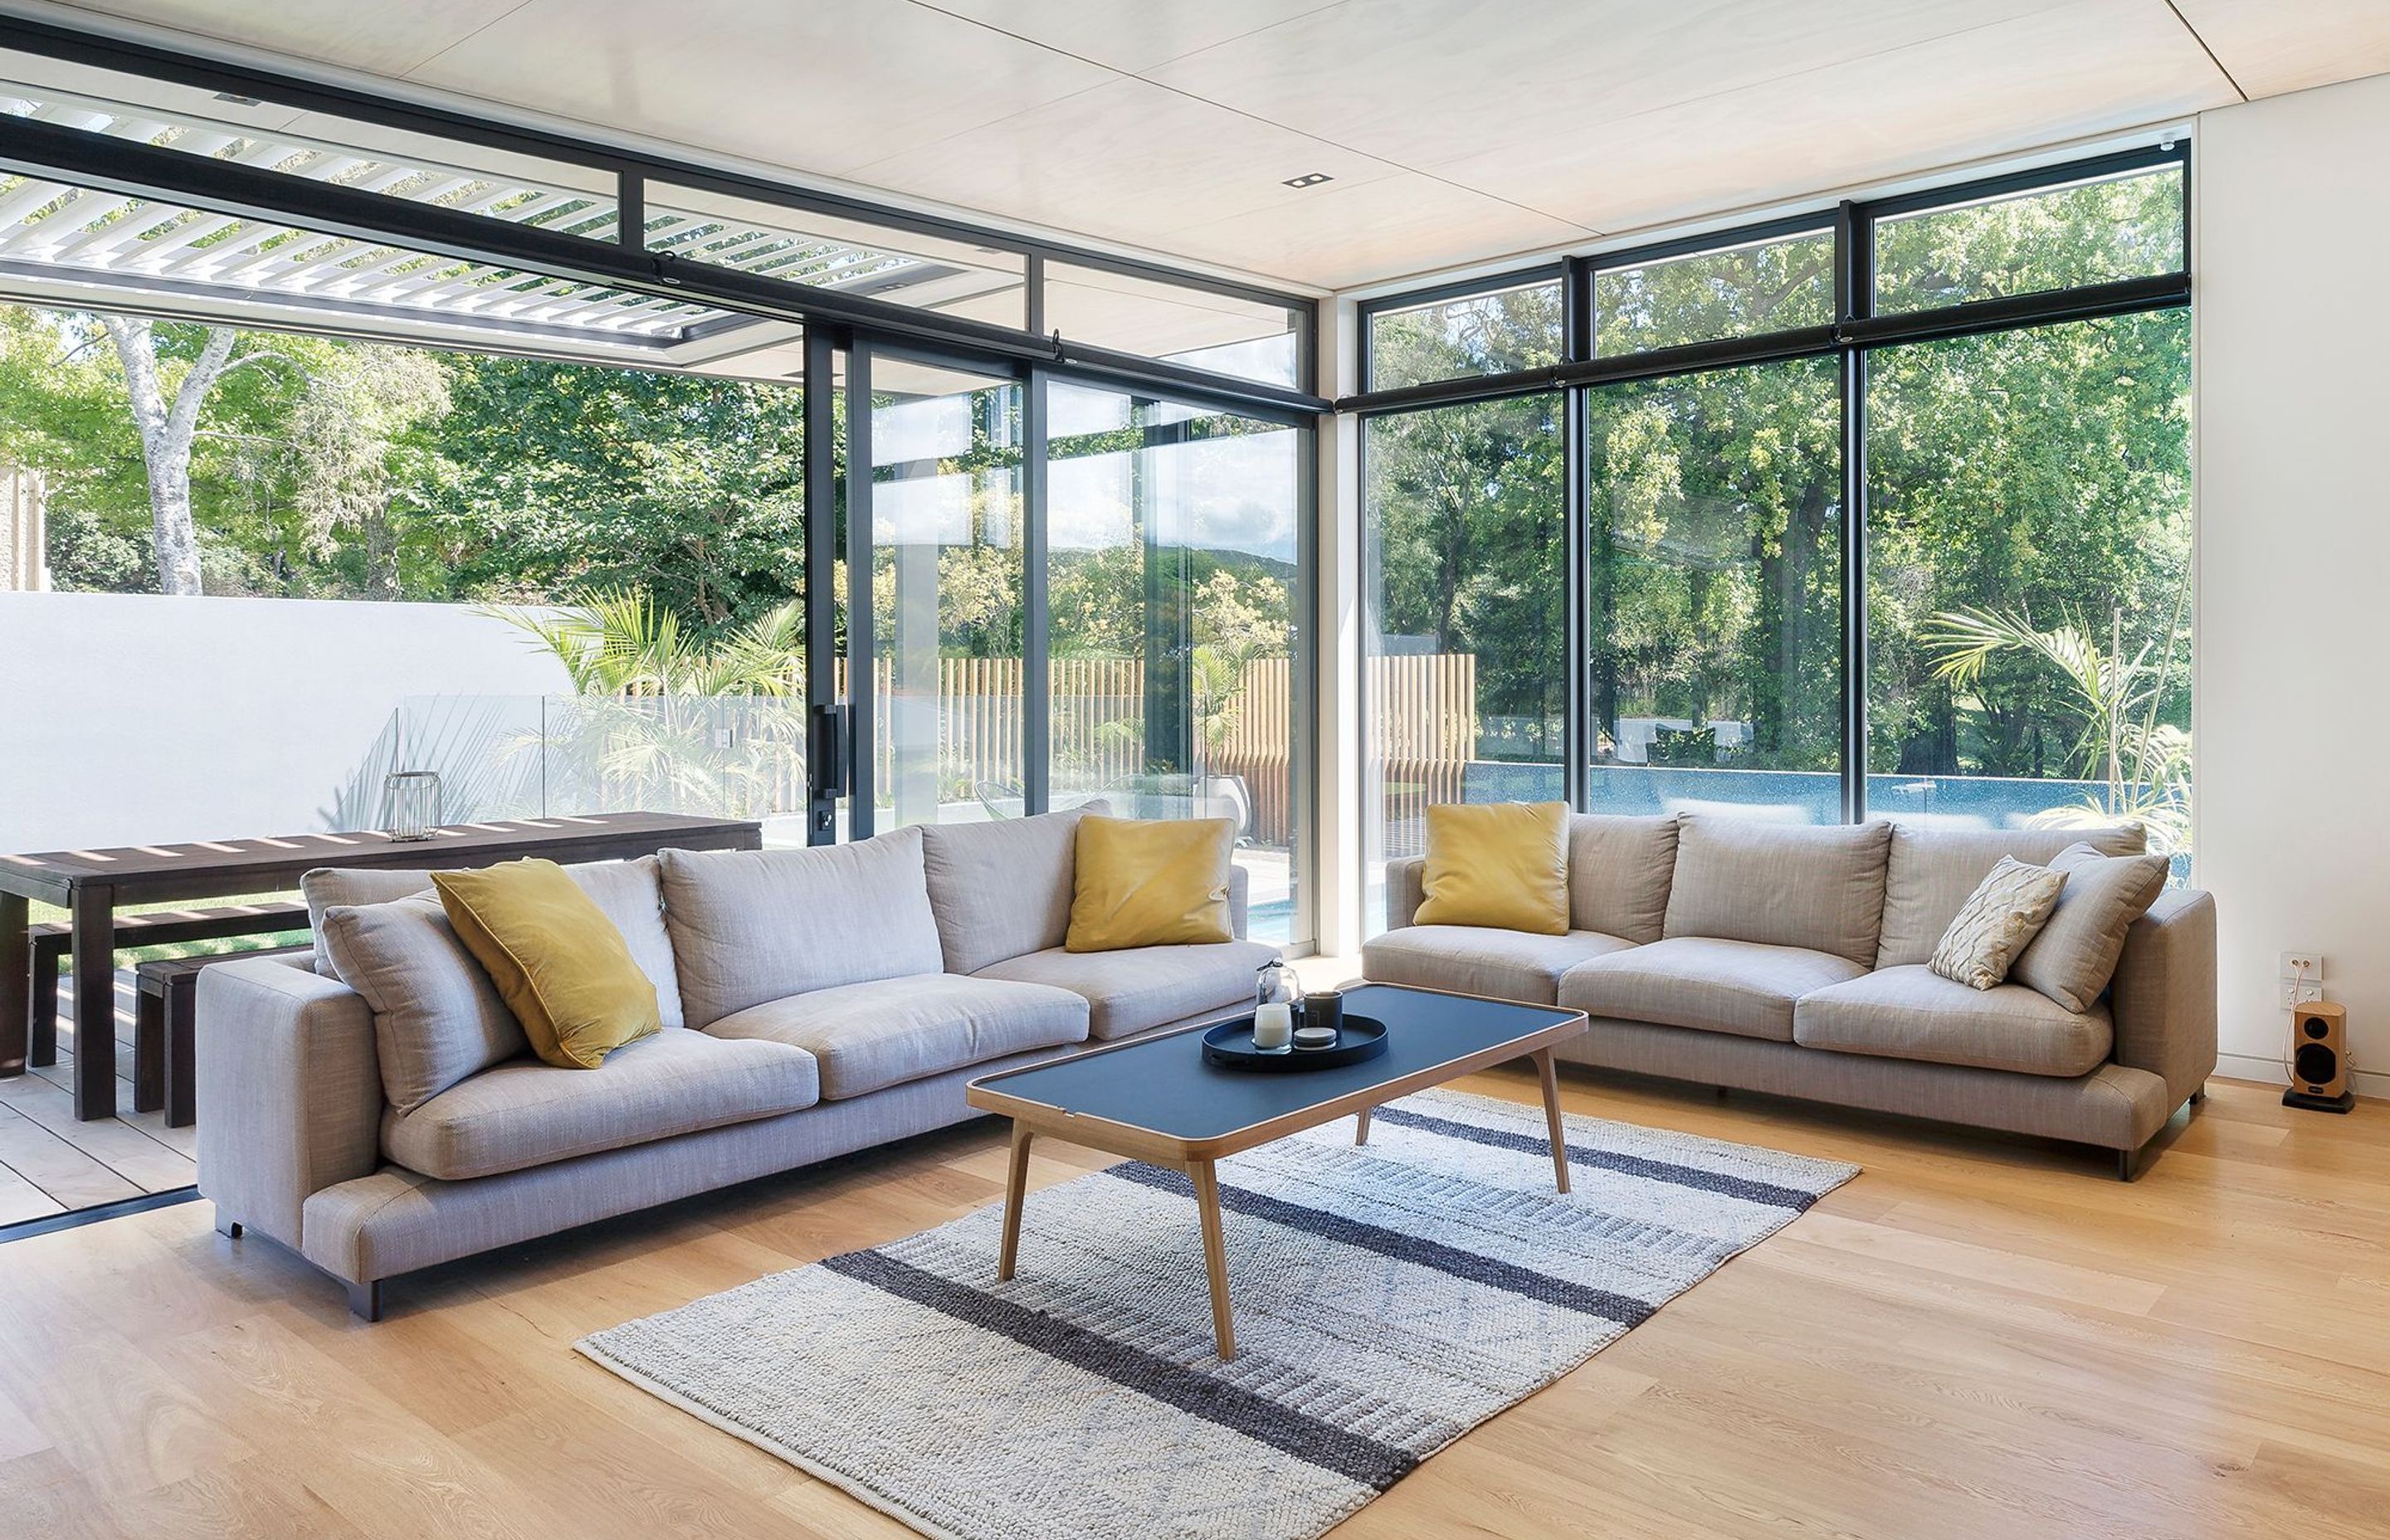 Floor-to-ceiling glazing fills the open-plan lounge area with light, while clerestory windows provide cross ventilation.